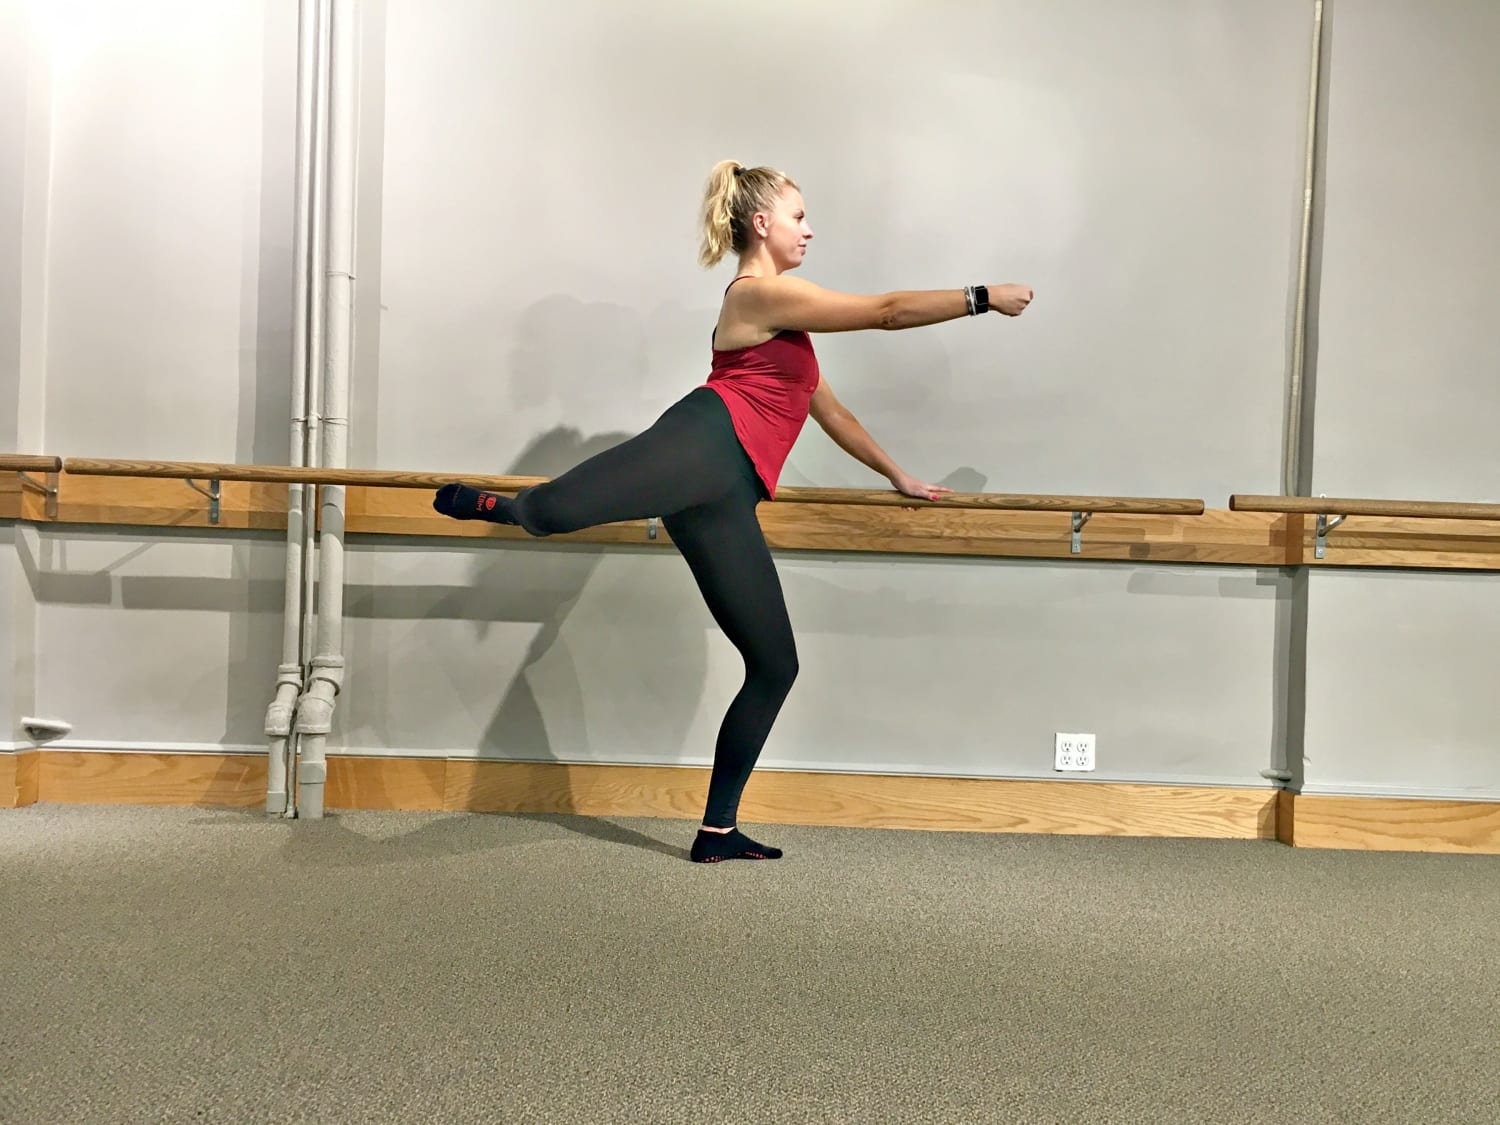 gluteal muscles exercise